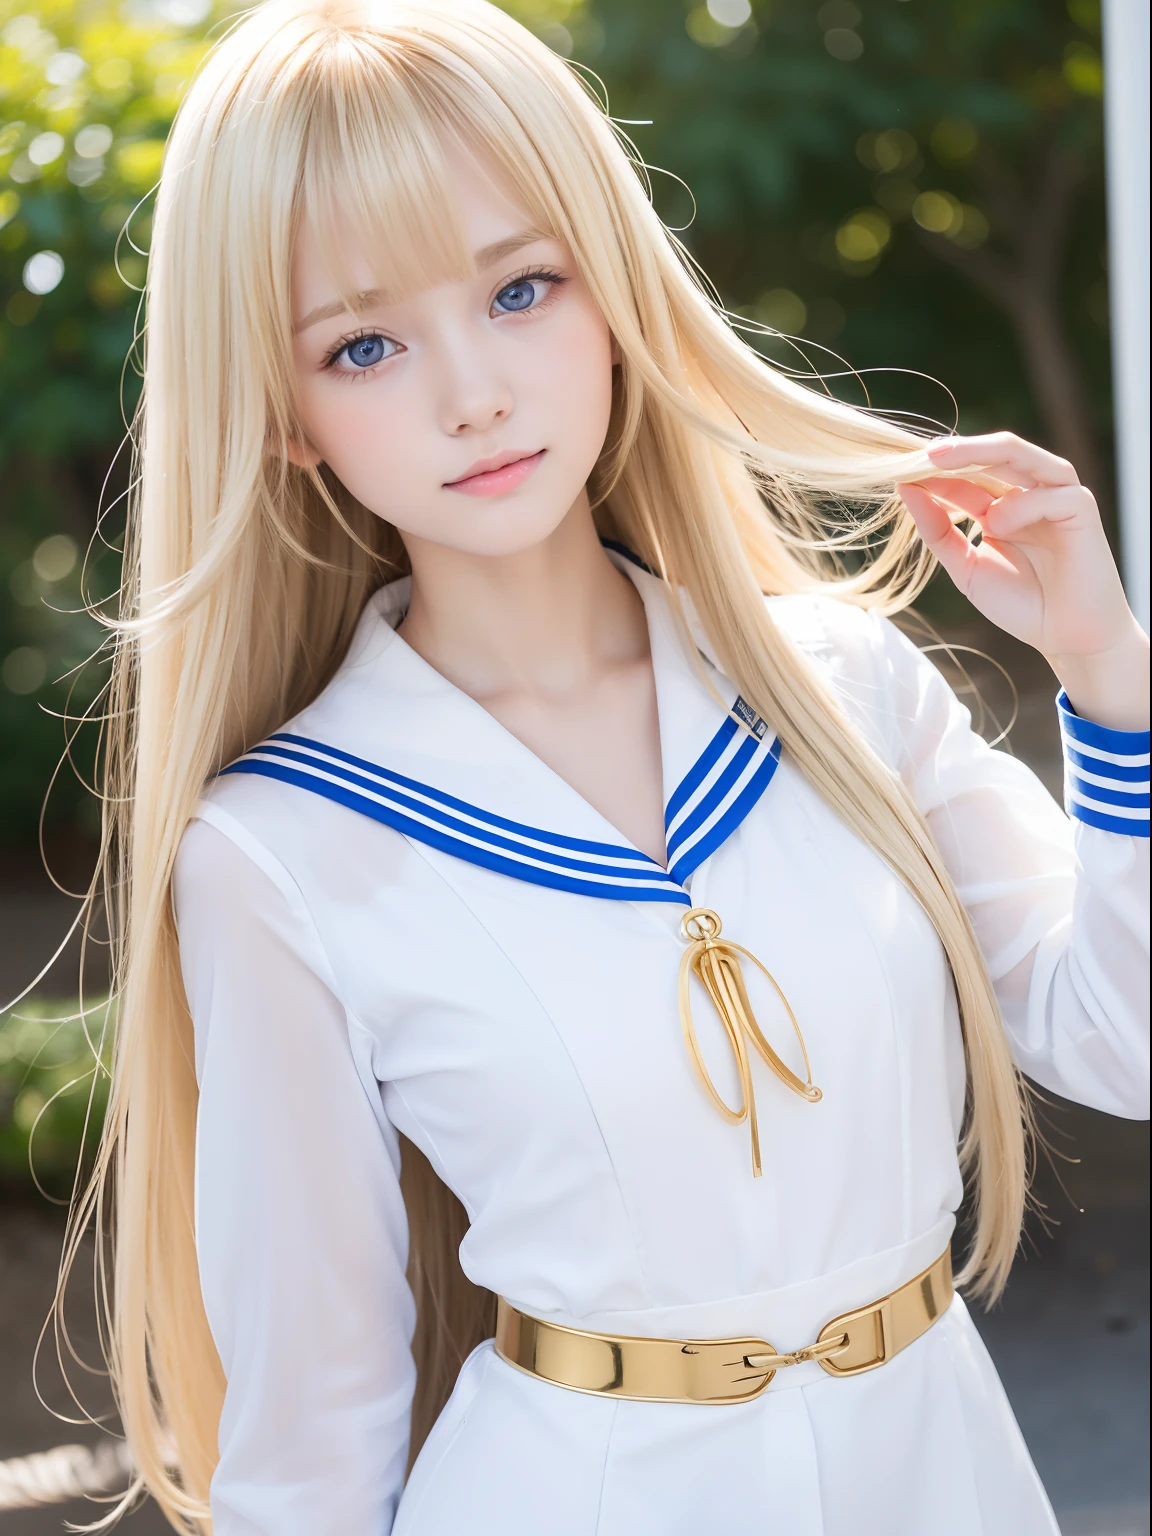 The most beautiful girl in the world, White, firm and shiny skin, Bangs between the eyes, Beautiful blonde shining with gold, Super Long Straight Silky Hair, eye line, Sexy beautiful innocent 15 years old, High definition big beautiful bright blue eyes, Beautiful and nice girl, Baby face, japanese sailor suits、student clothes